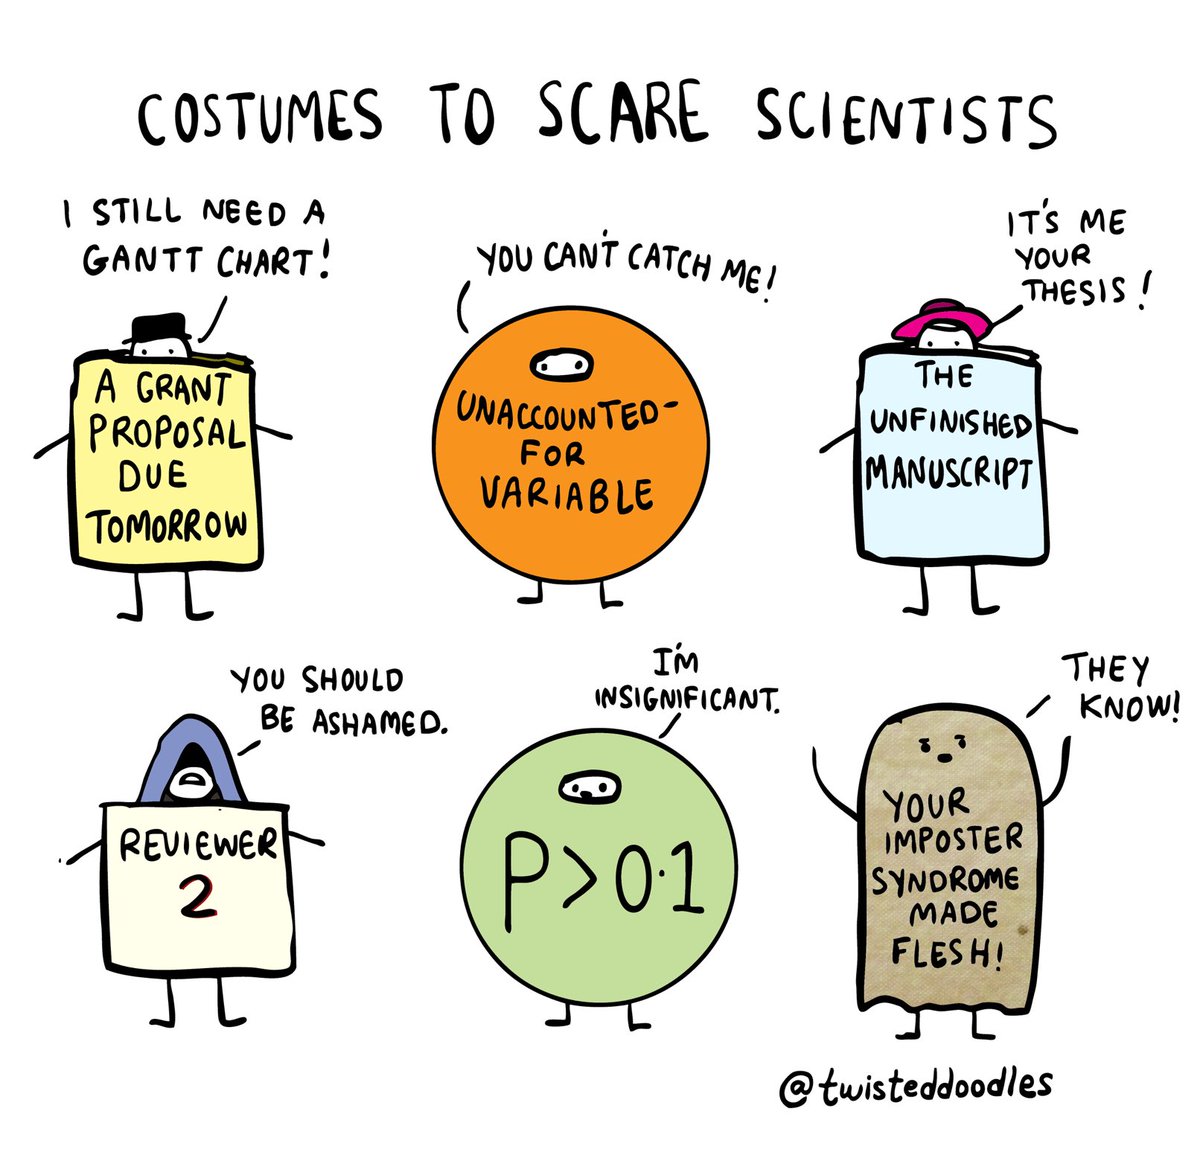 Costumes to scare scientists #academictwitter